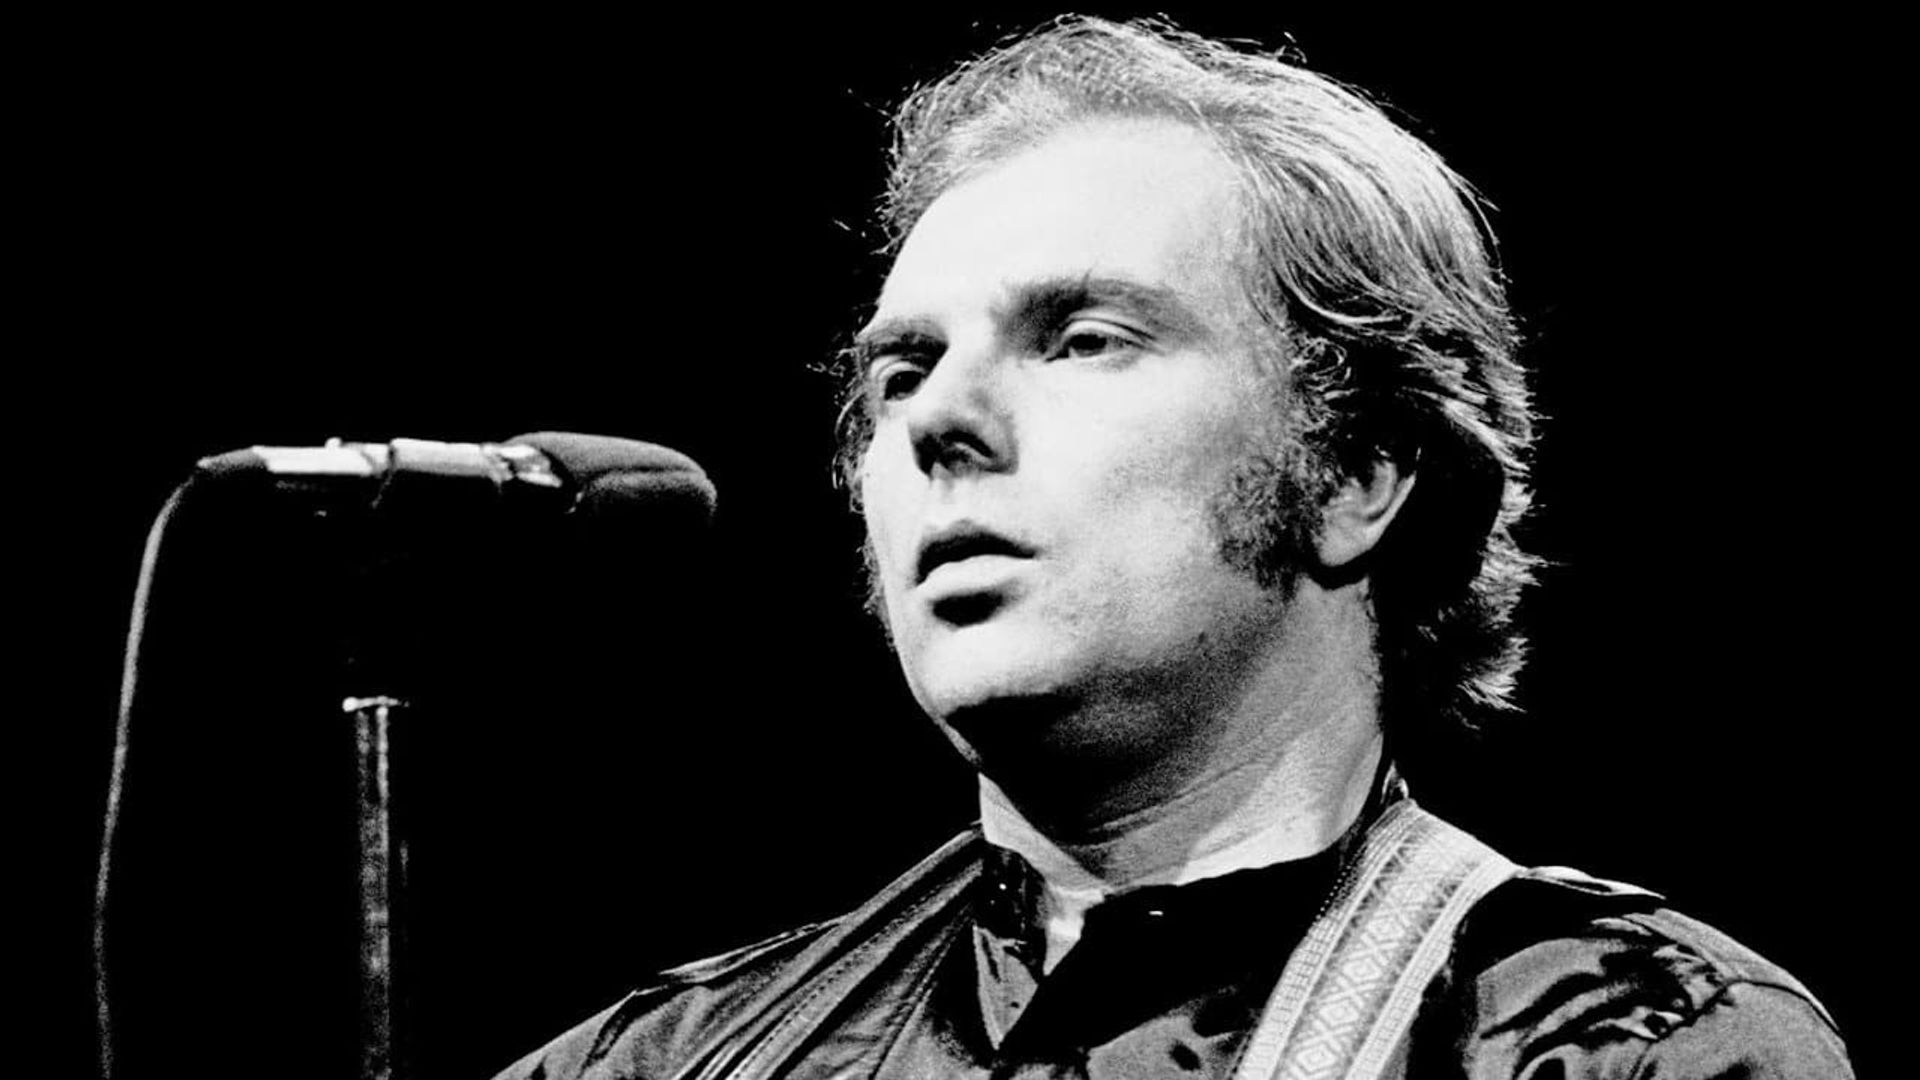 Van Morrison: Another Glorious Decade background